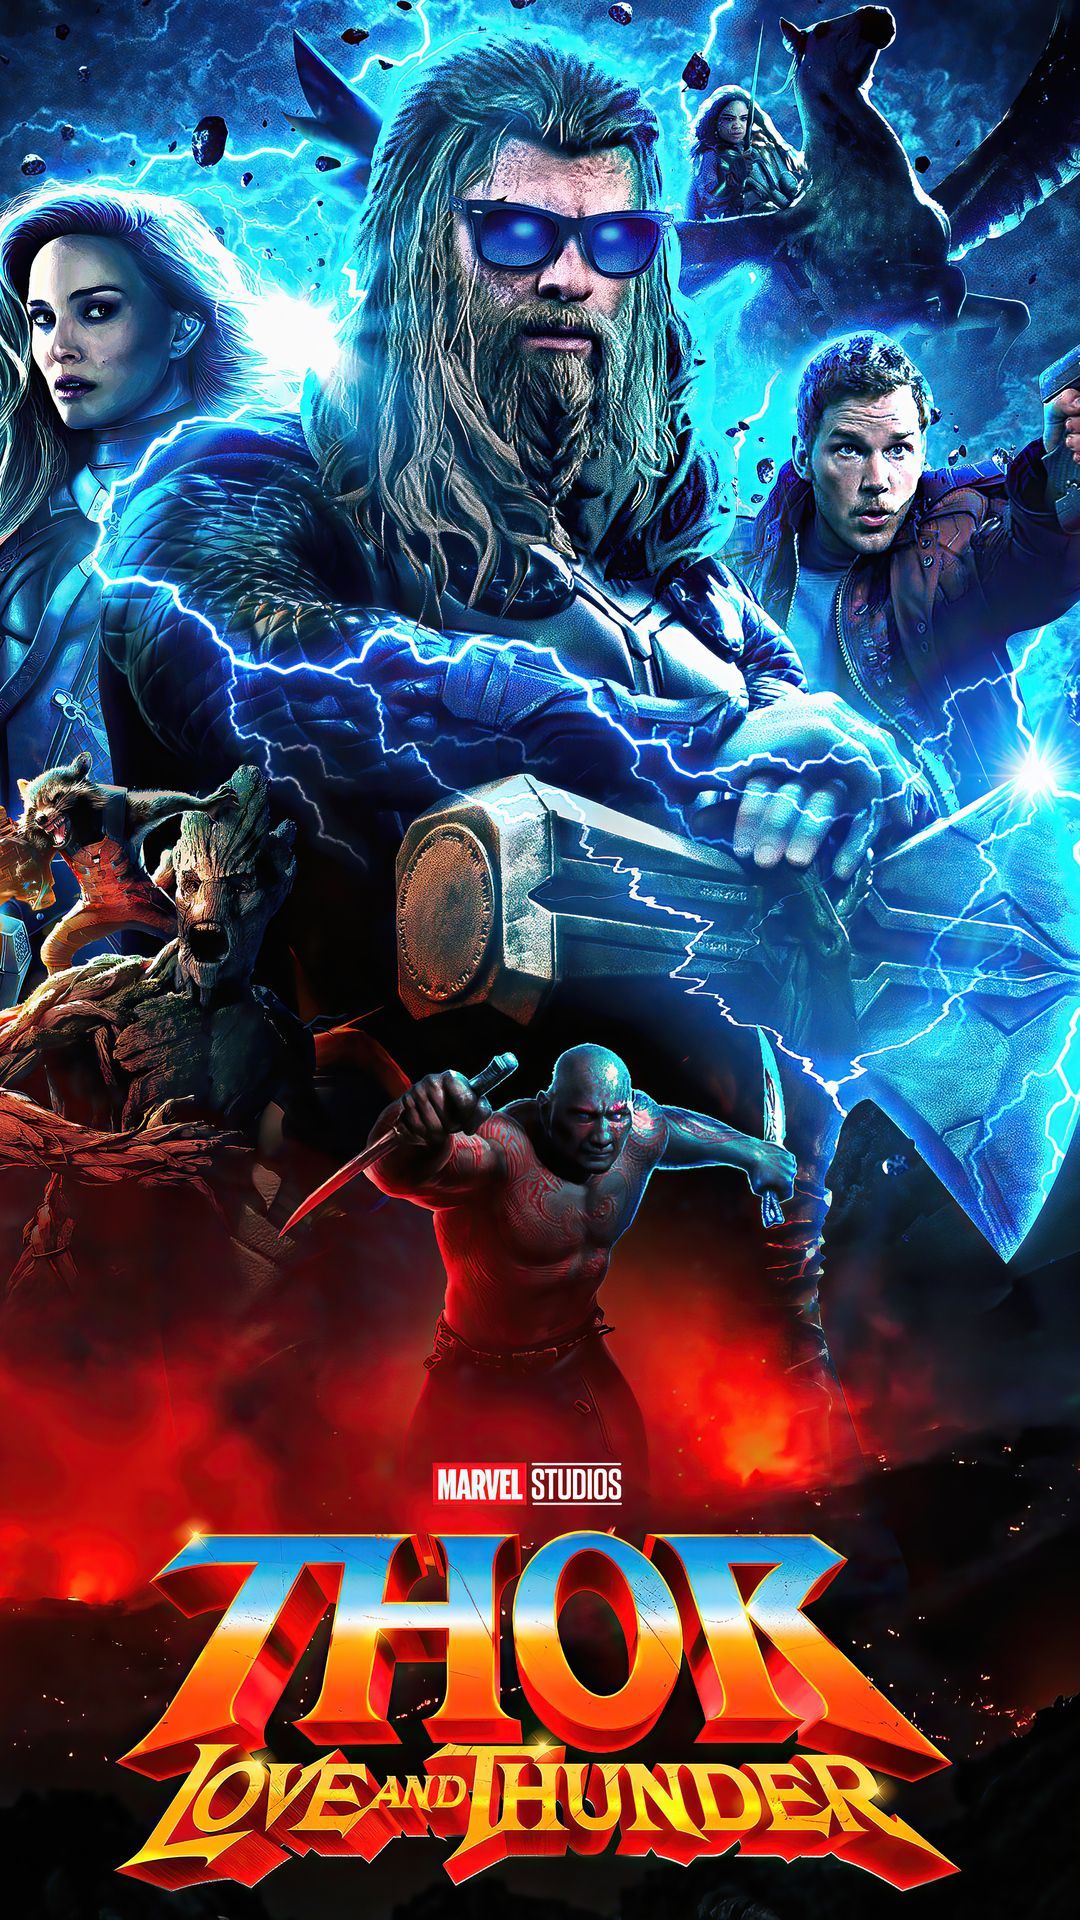 Thor love and thunder movie poster - Thor